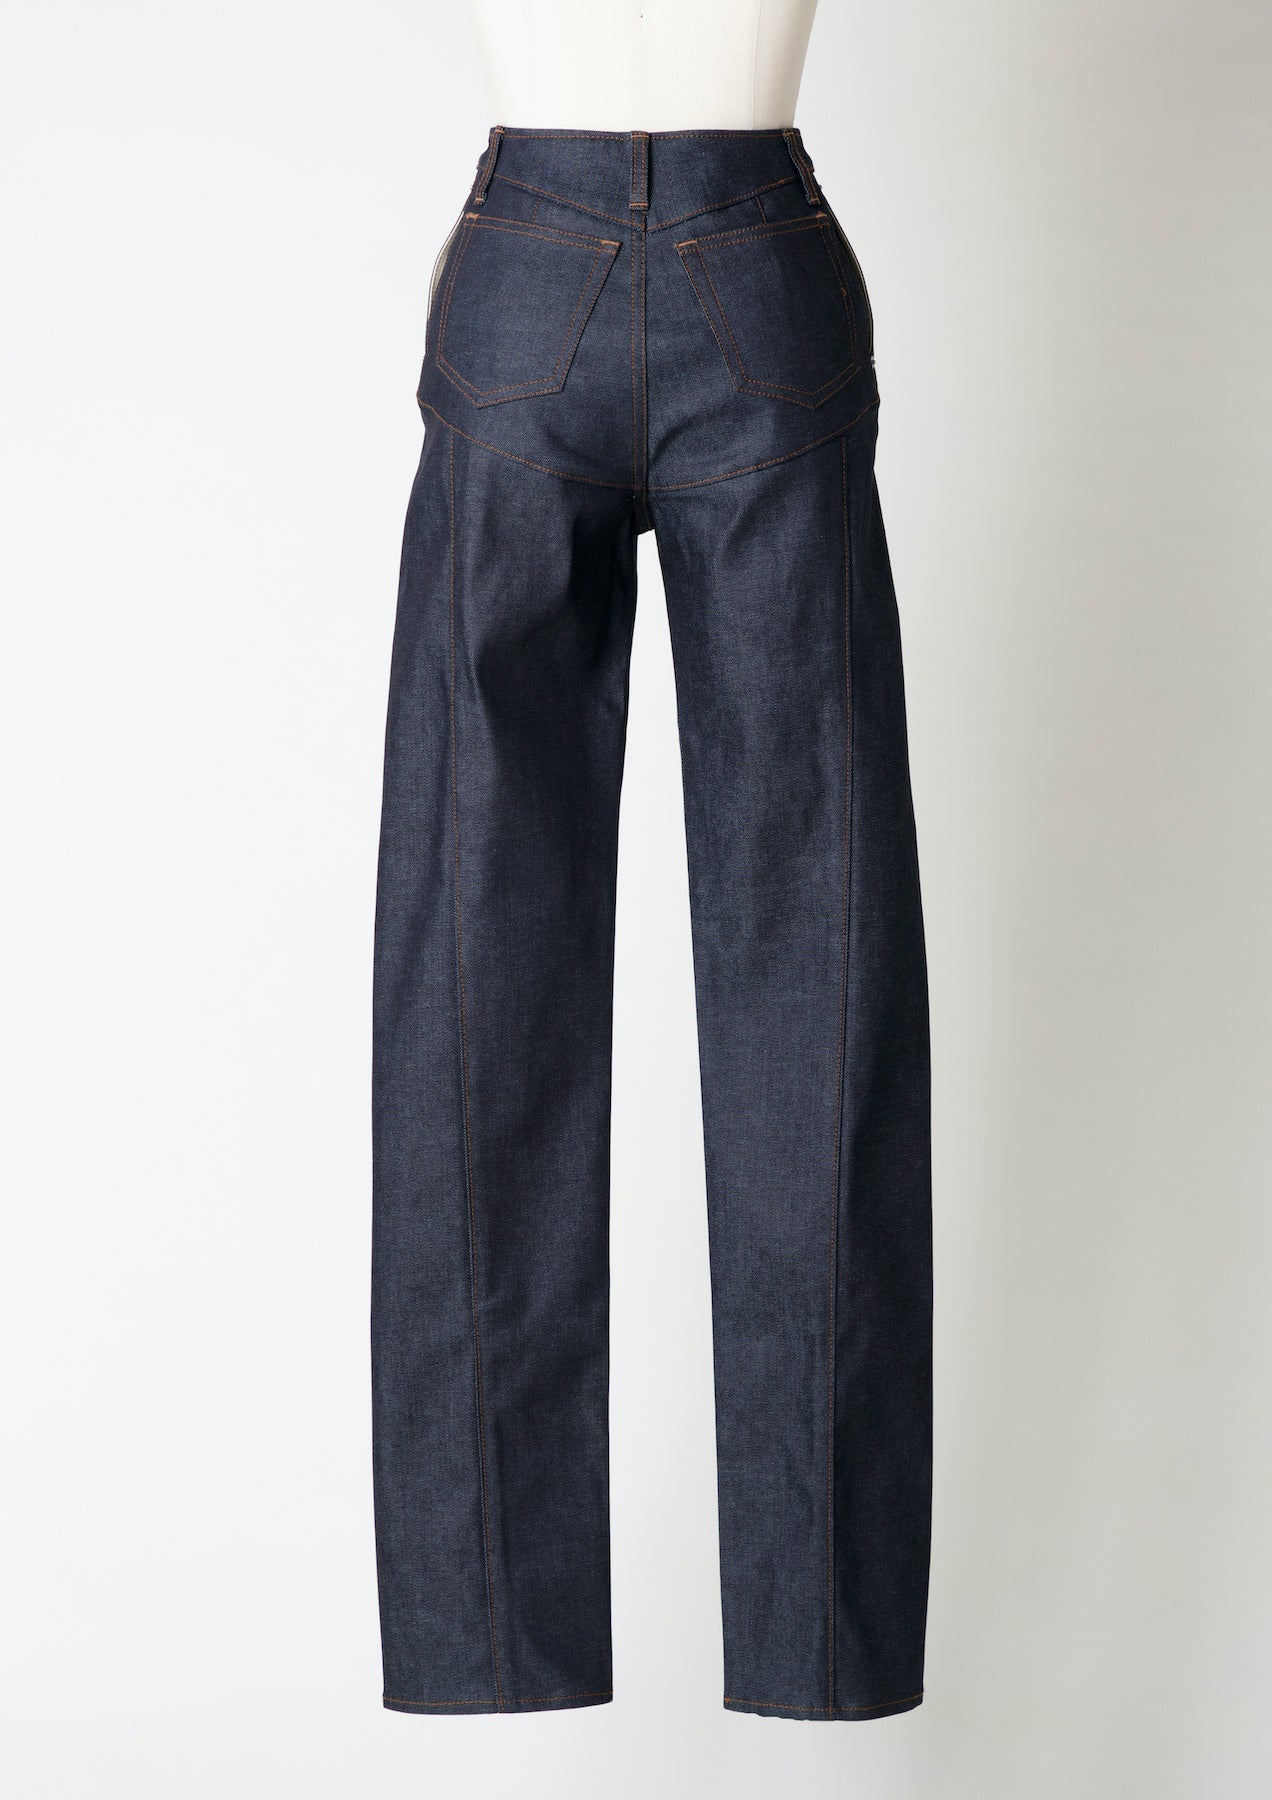 12oz HIGH-RISE COATED JEANS